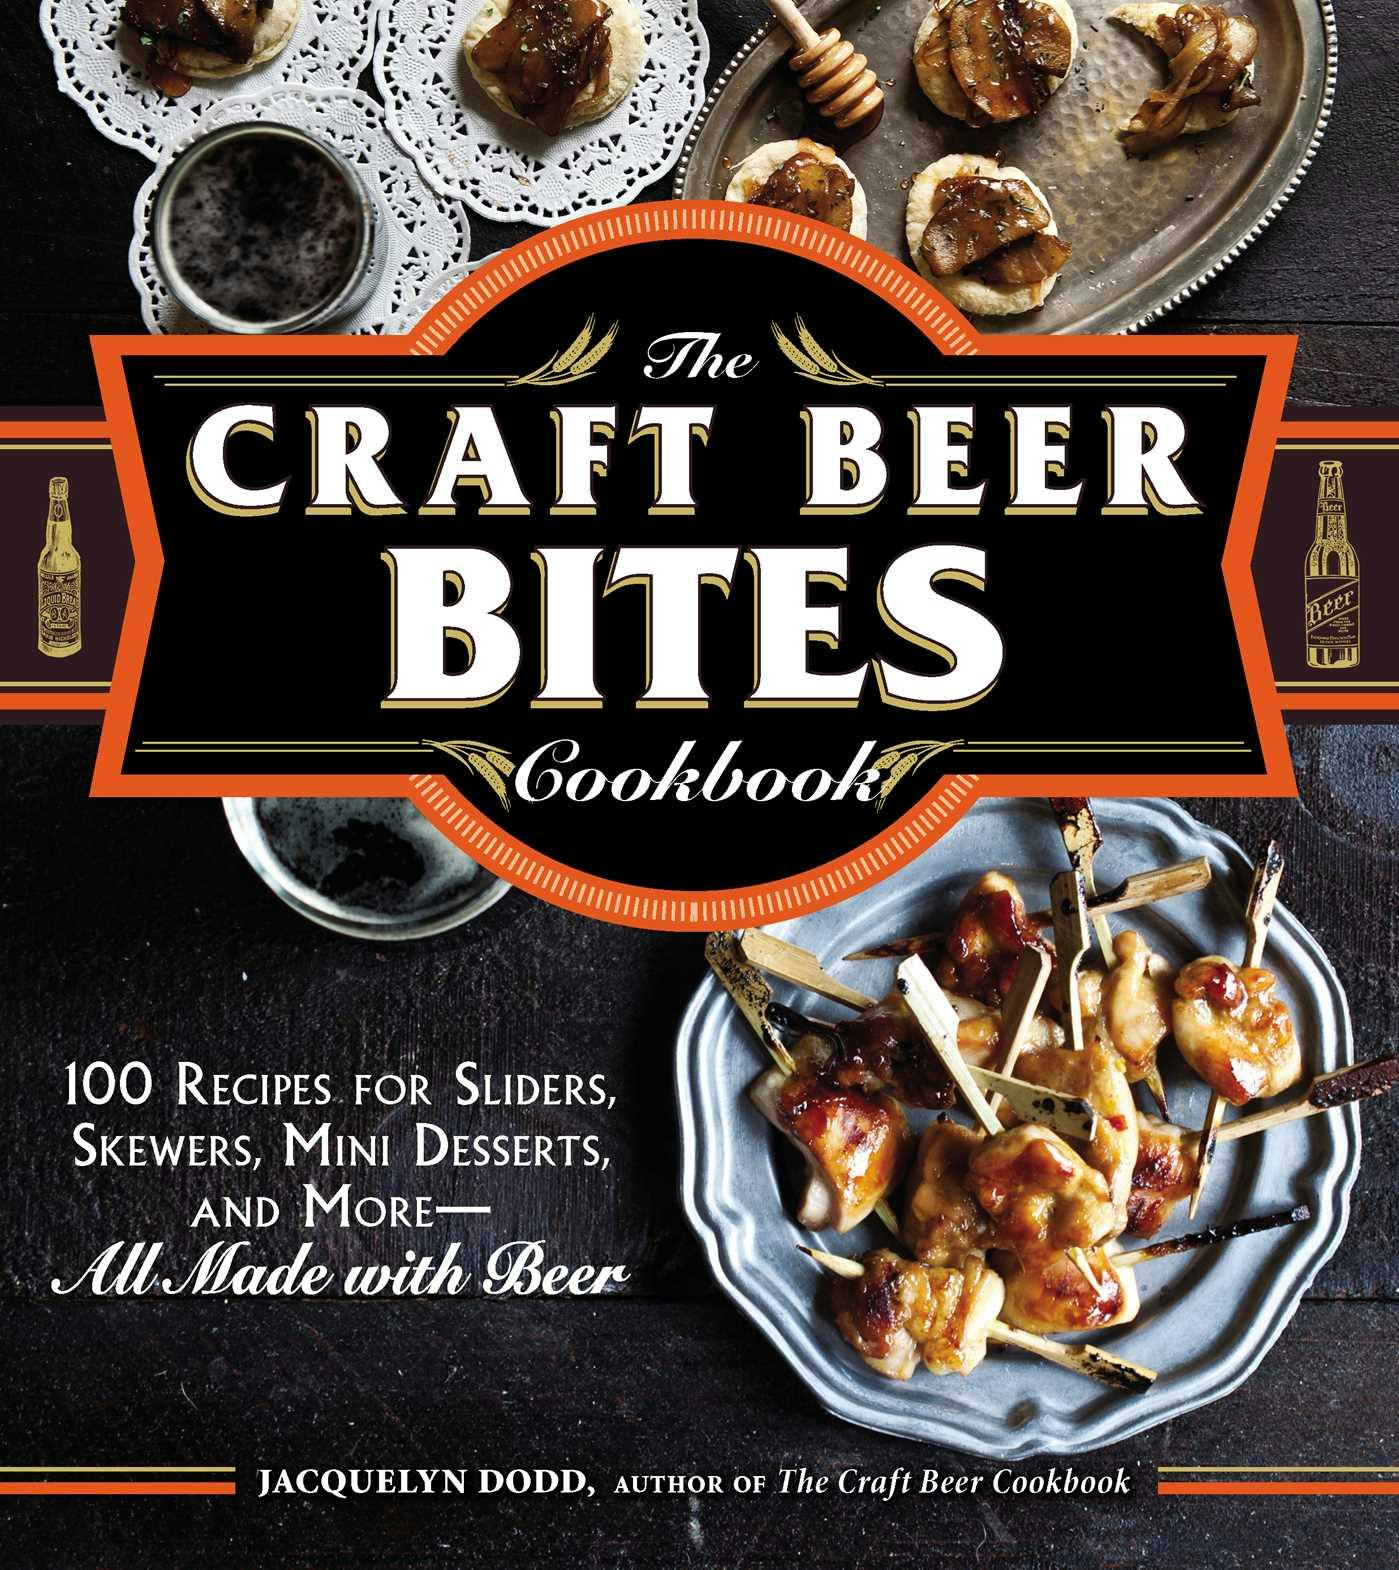 The Craft Beer Bites Cookbook: 100 Recipes for Sliders, Skewers, Mini Desserts, and More--All Made with Beer - Jacquelyn Dodd